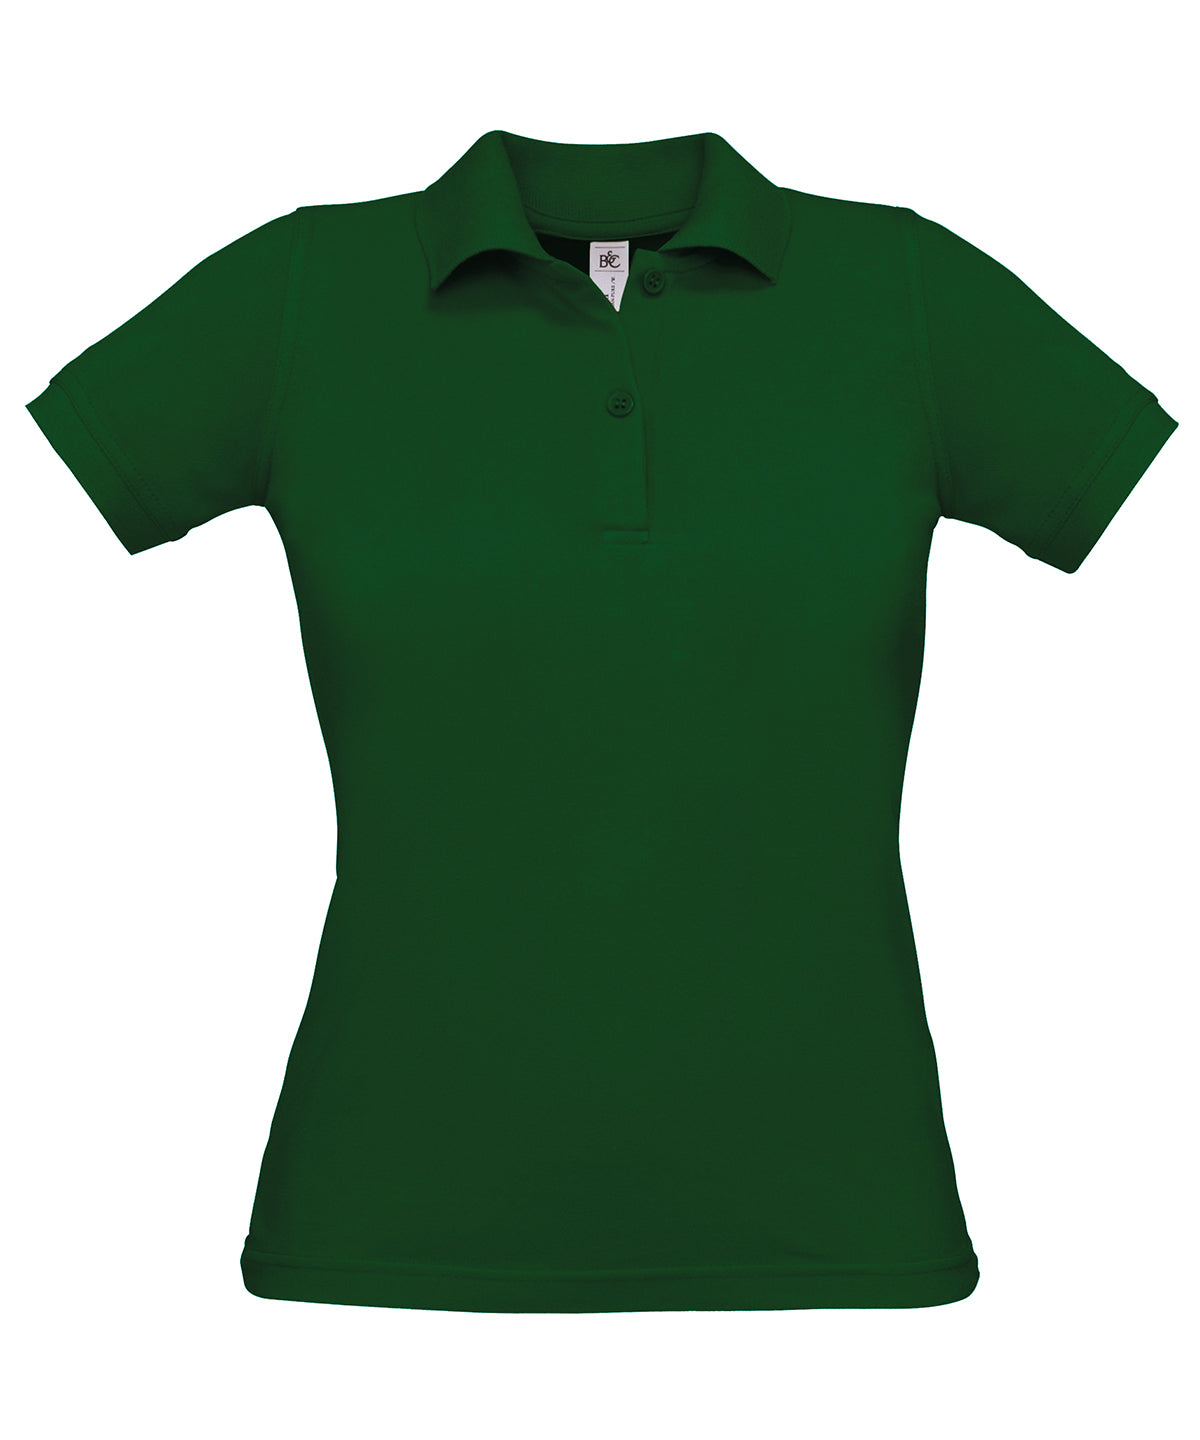 Personalised Polo Shirts - Black B&C Collection B&C Safran pure /women